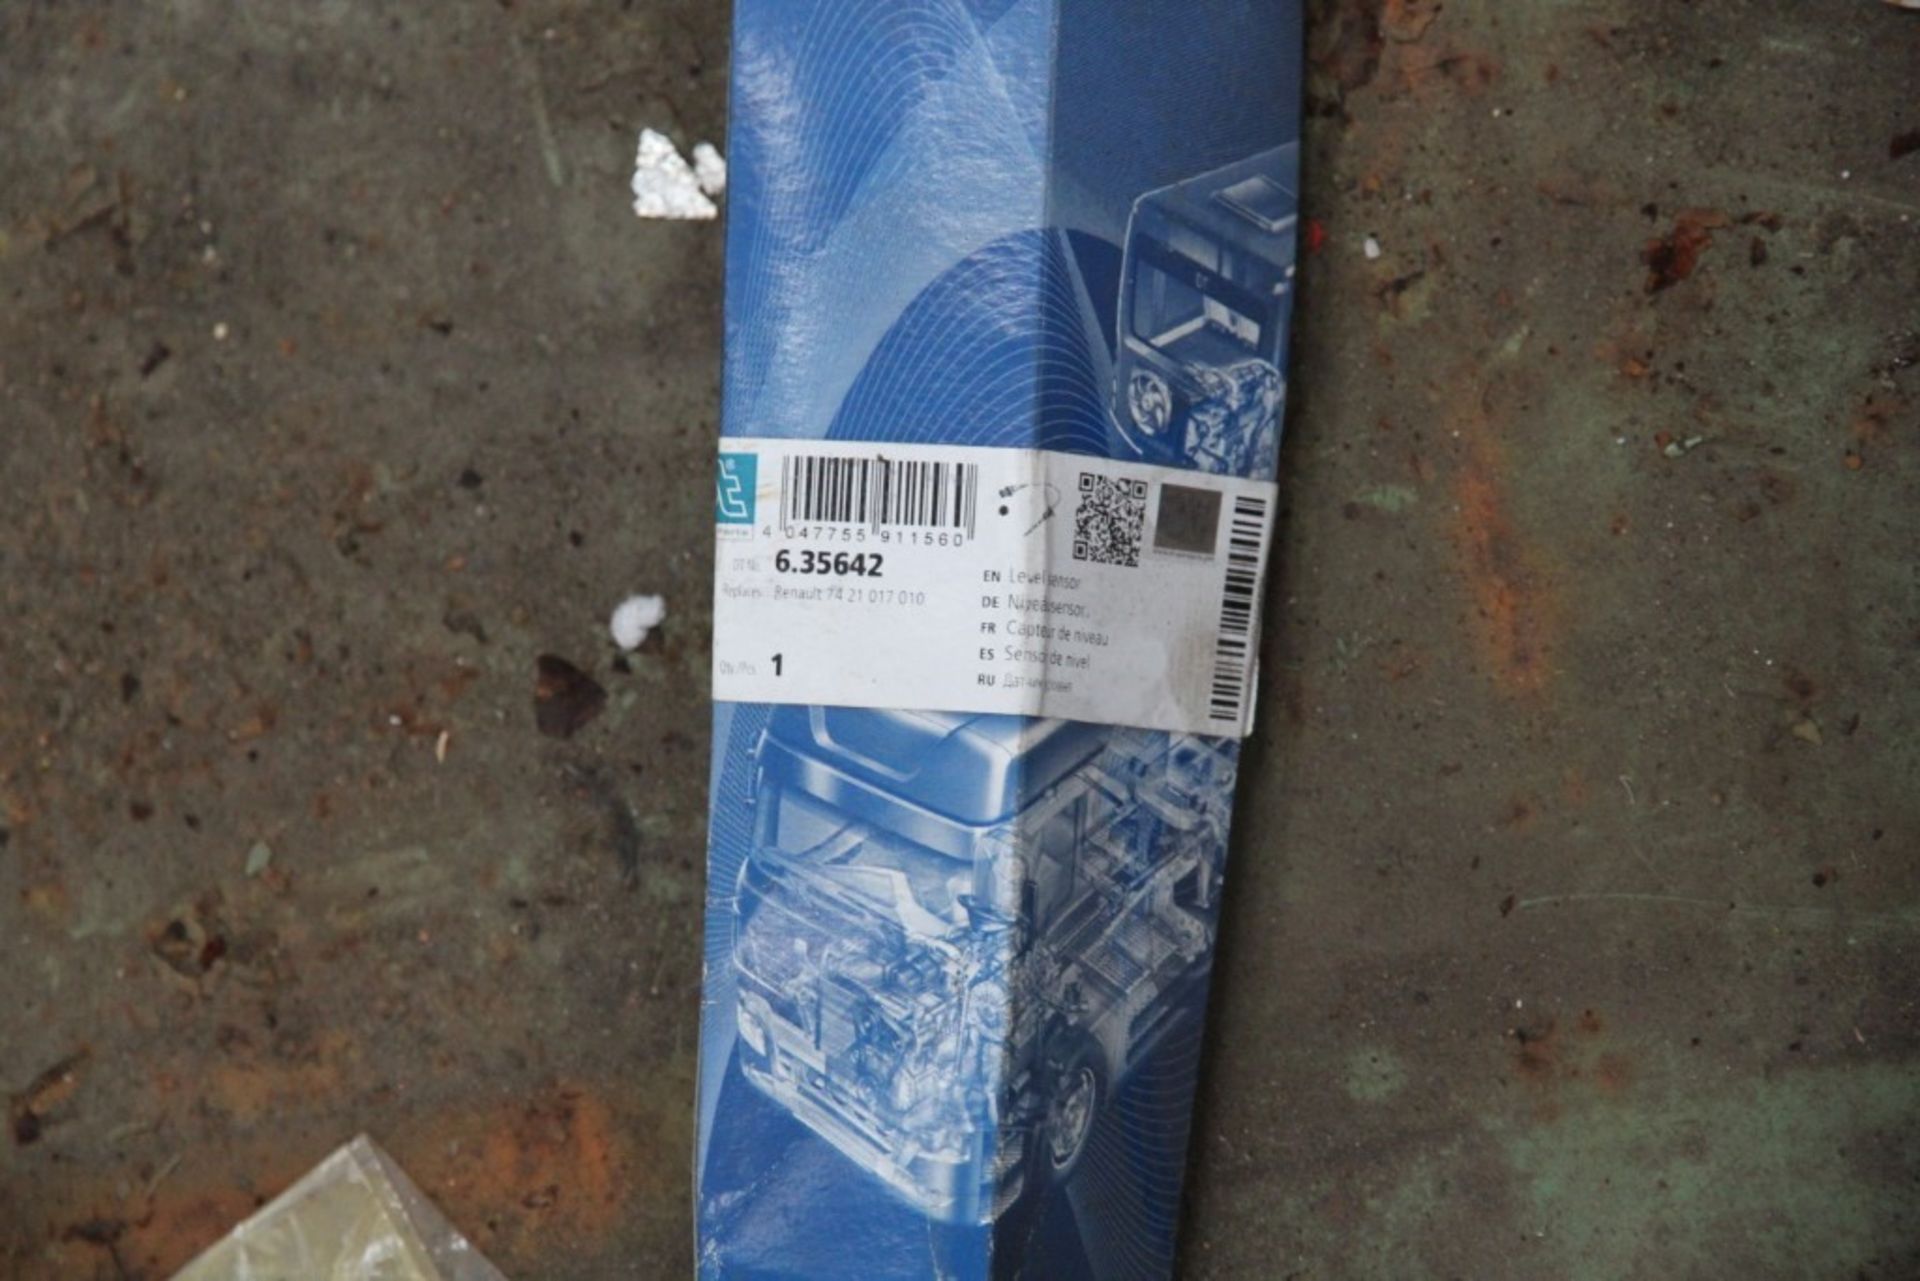 Renault Parts (1 Pallet) - Image 3 of 21